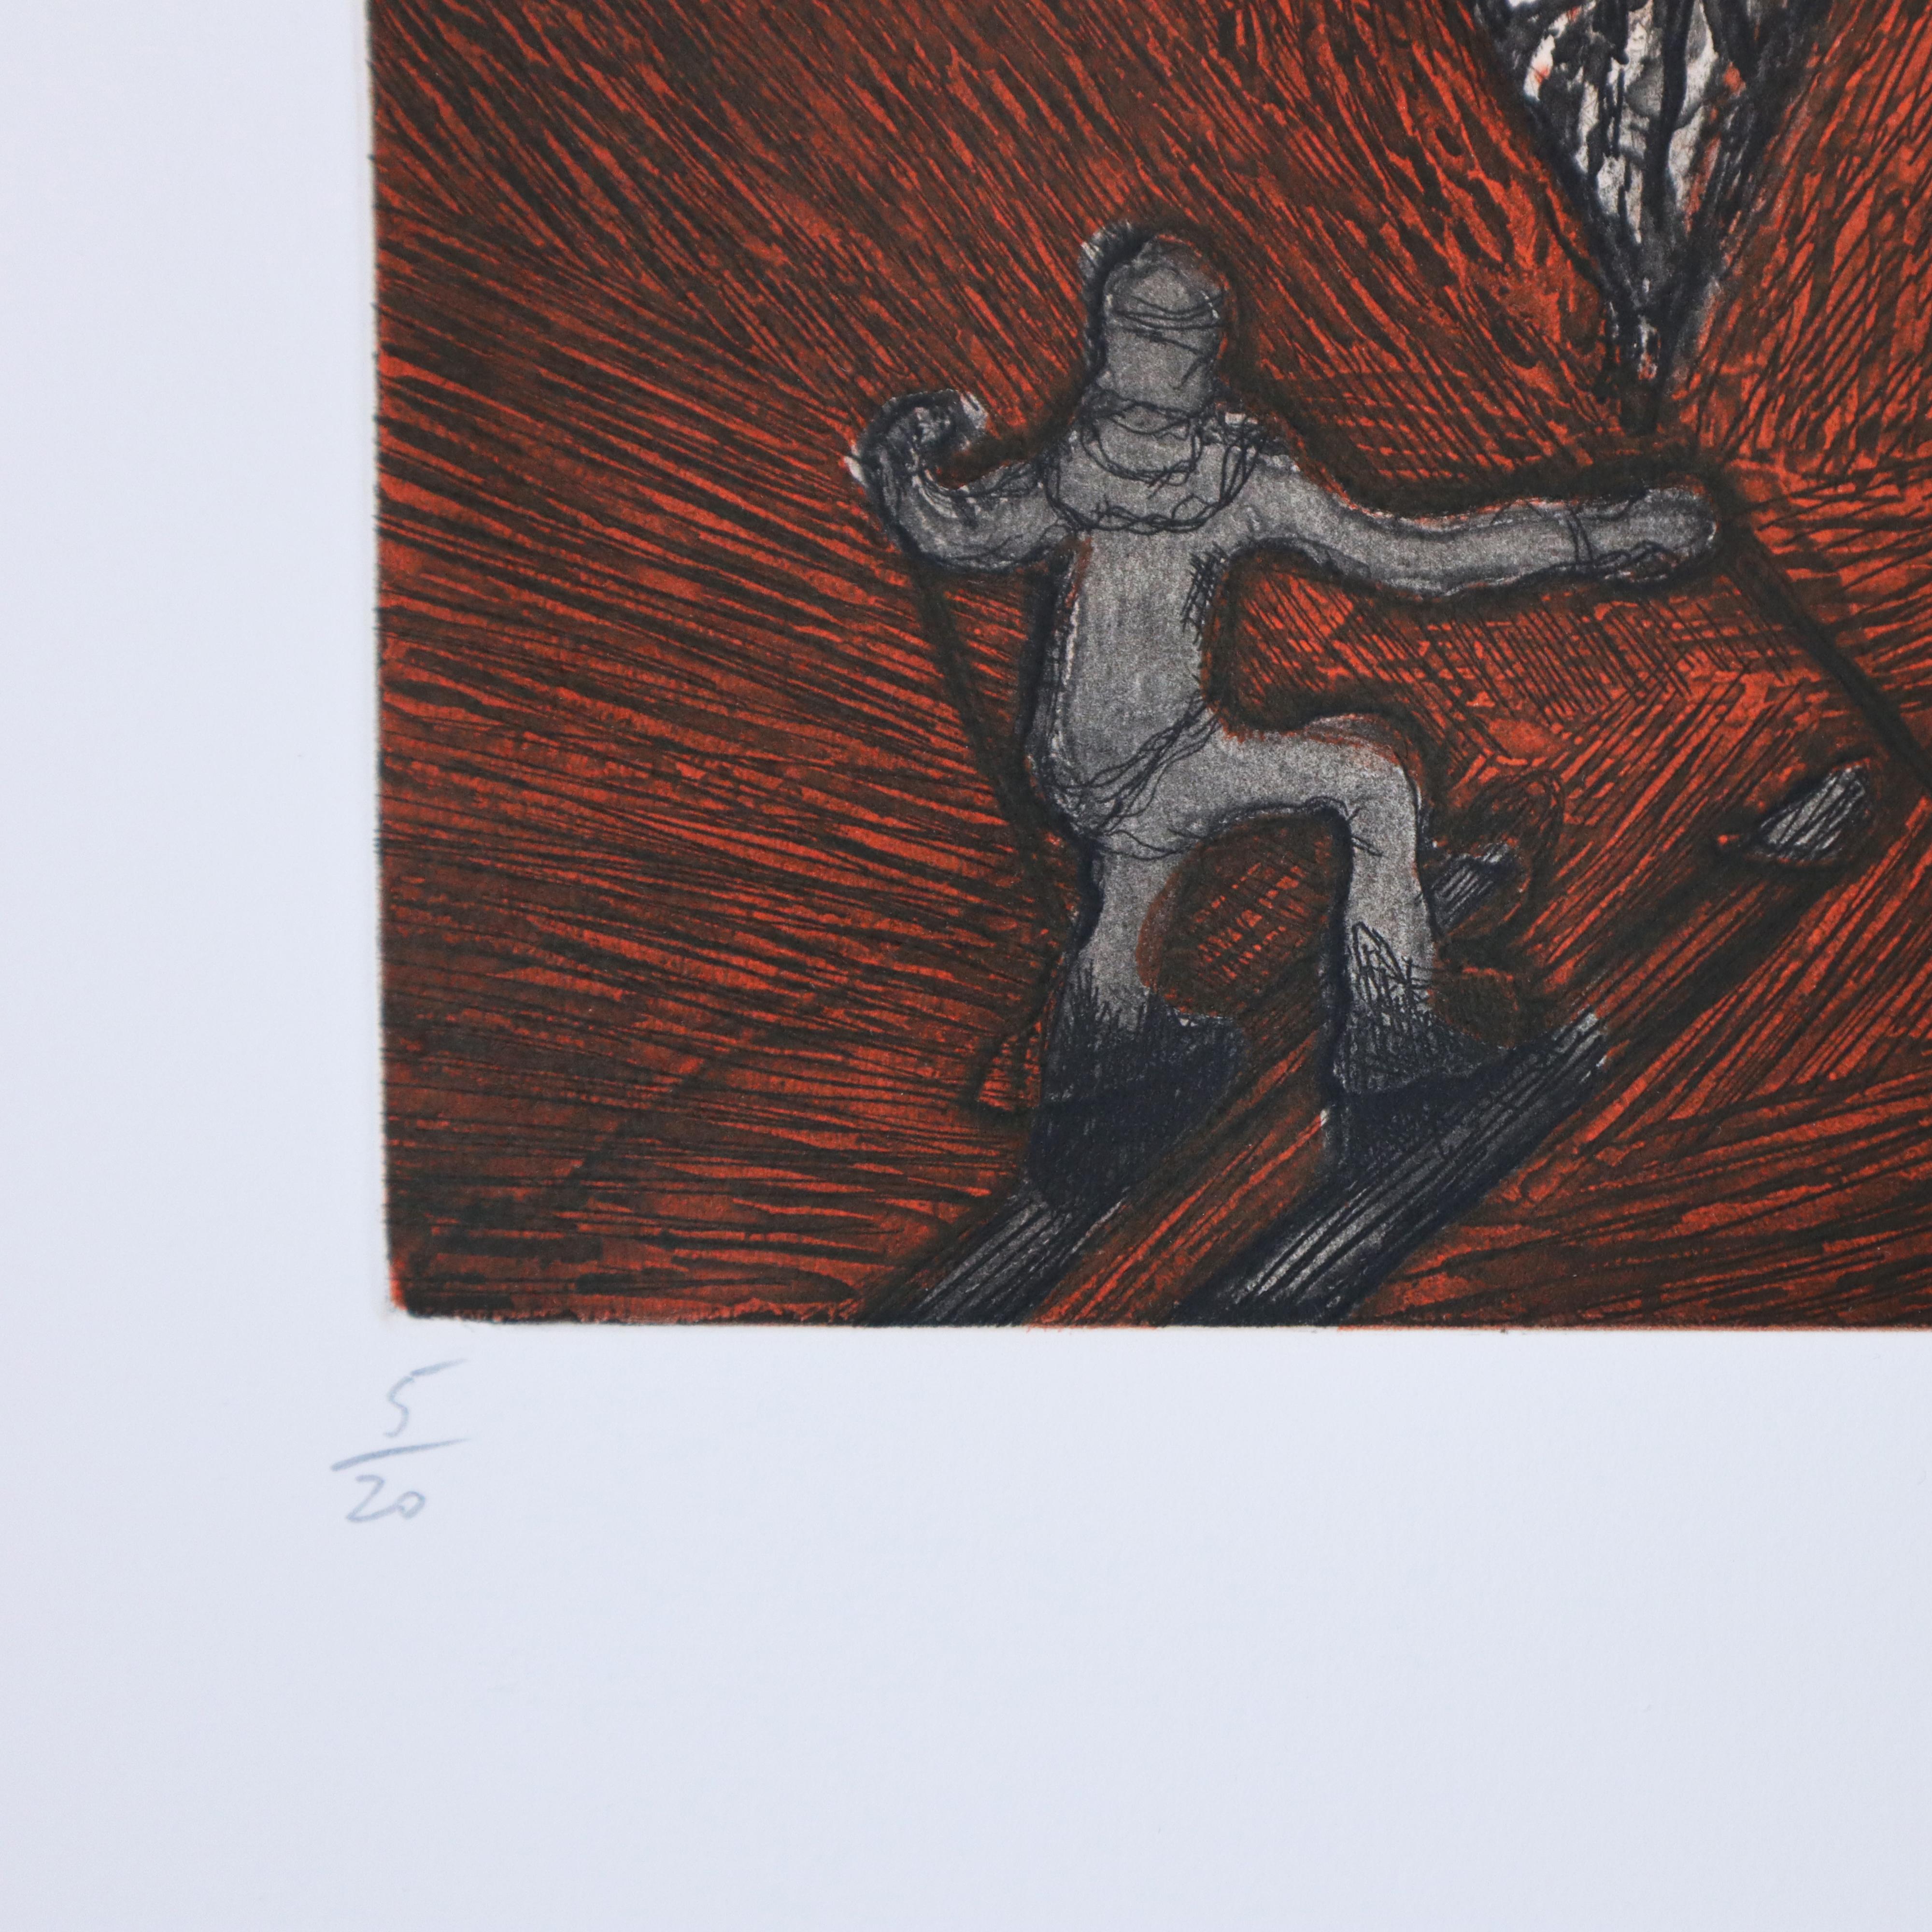 Couloir (Red), 2021 — Peter Doig, Contemporary, 21st Century, Etching with aquatint in two colors, Magic Realism
Edition of 20
Signed recto in graphite, accompanied by Certificate of Authenticity
In mint condition 

PLEASE NOTE: Images of edition